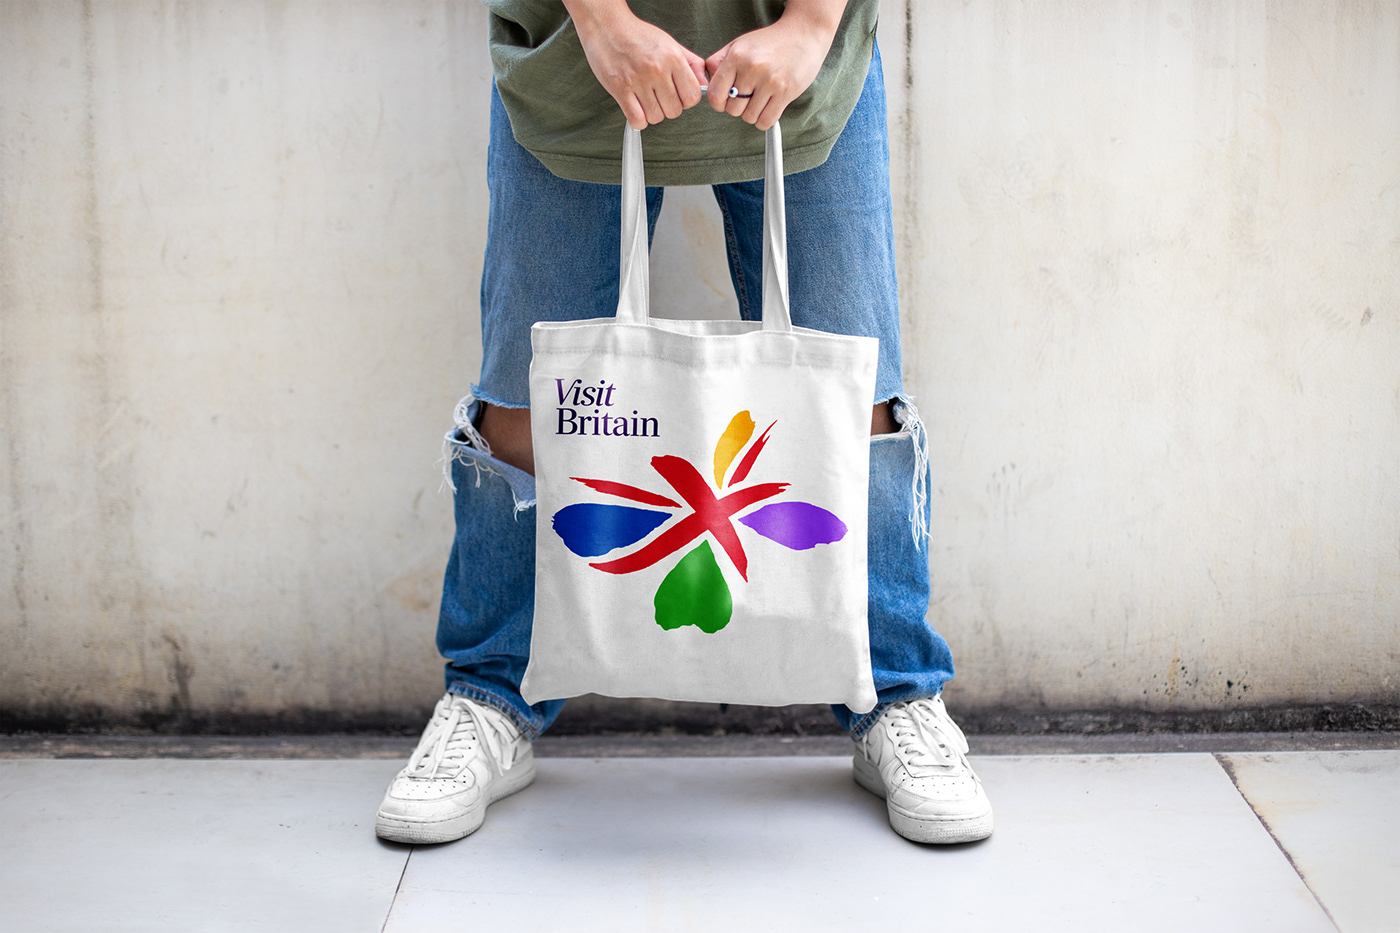 Visit Britain, Tourism Brand Identity. Union Jack butterfly logo on a tote bag 